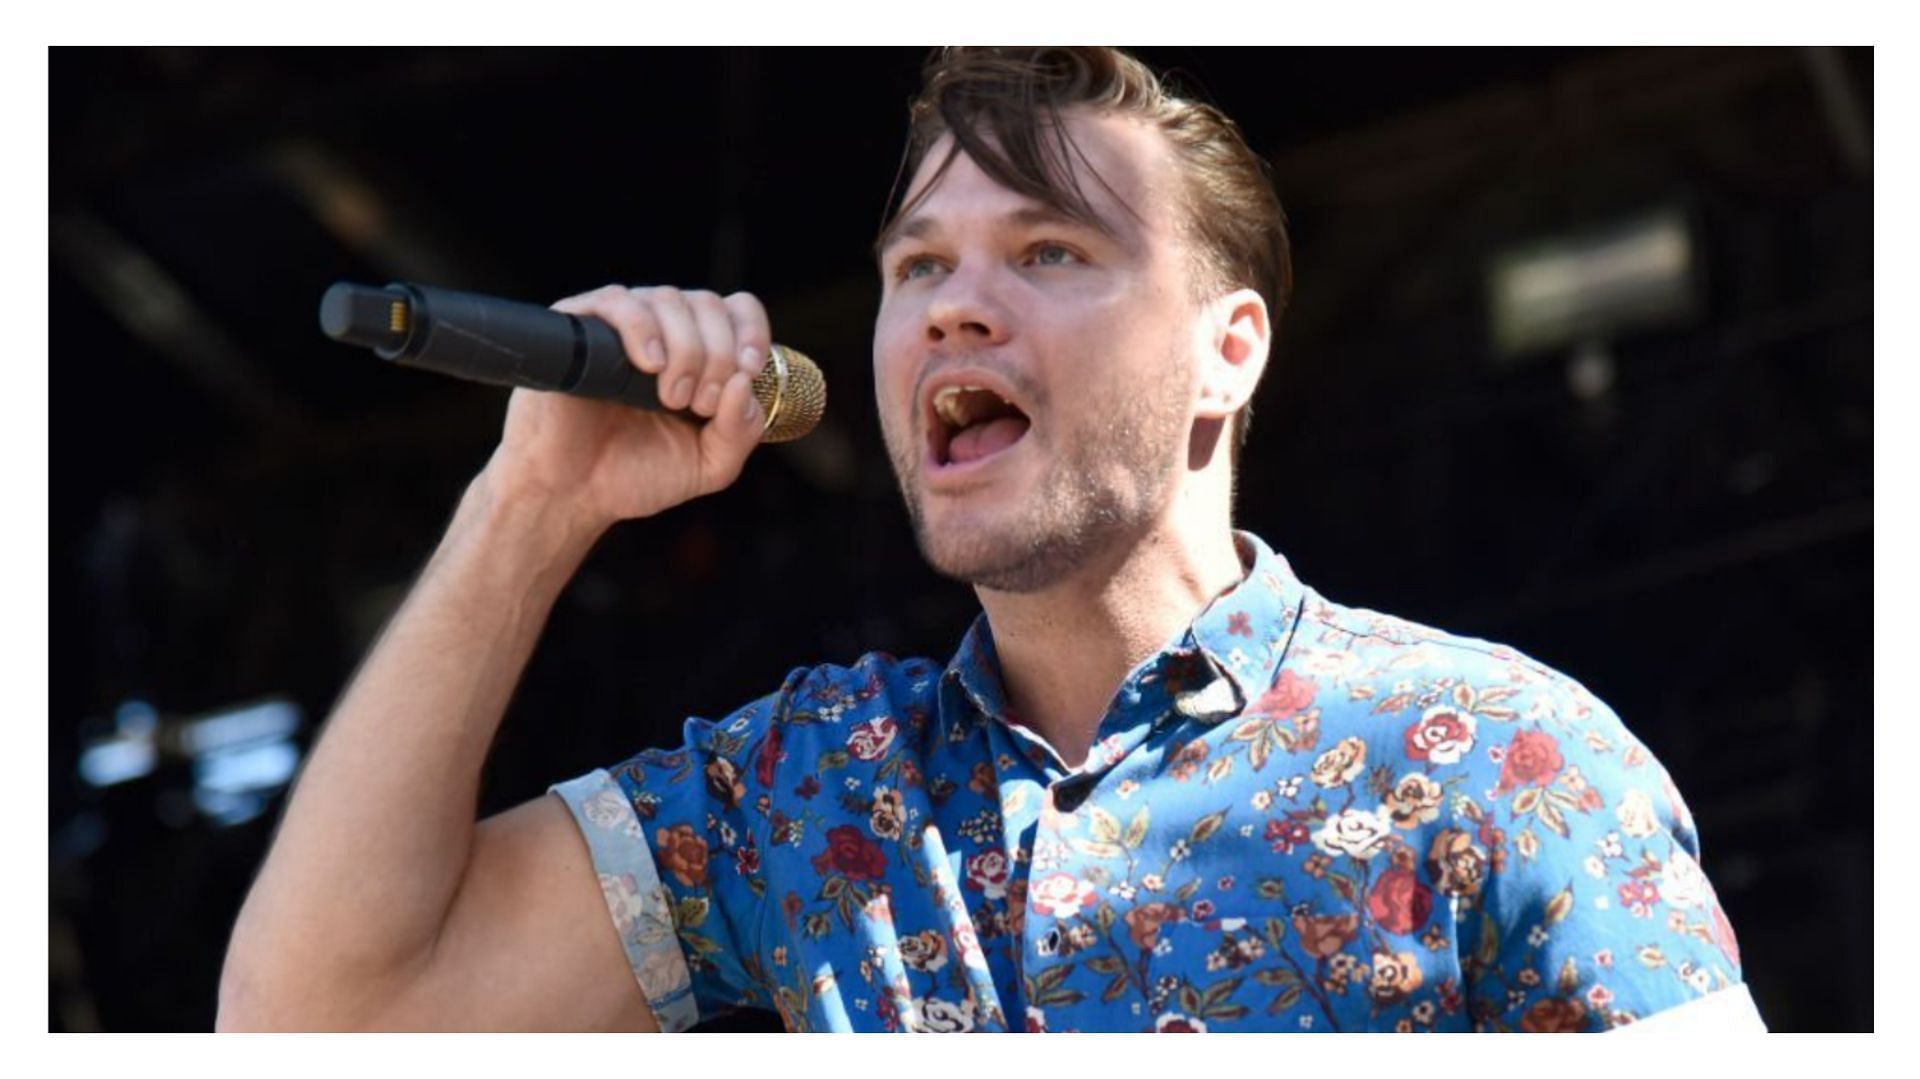 Tilian Pearson has stepped out of Dance Gavin Dance following the recent accusations against him (Image via Tim Mosenfelder/Getty Images)